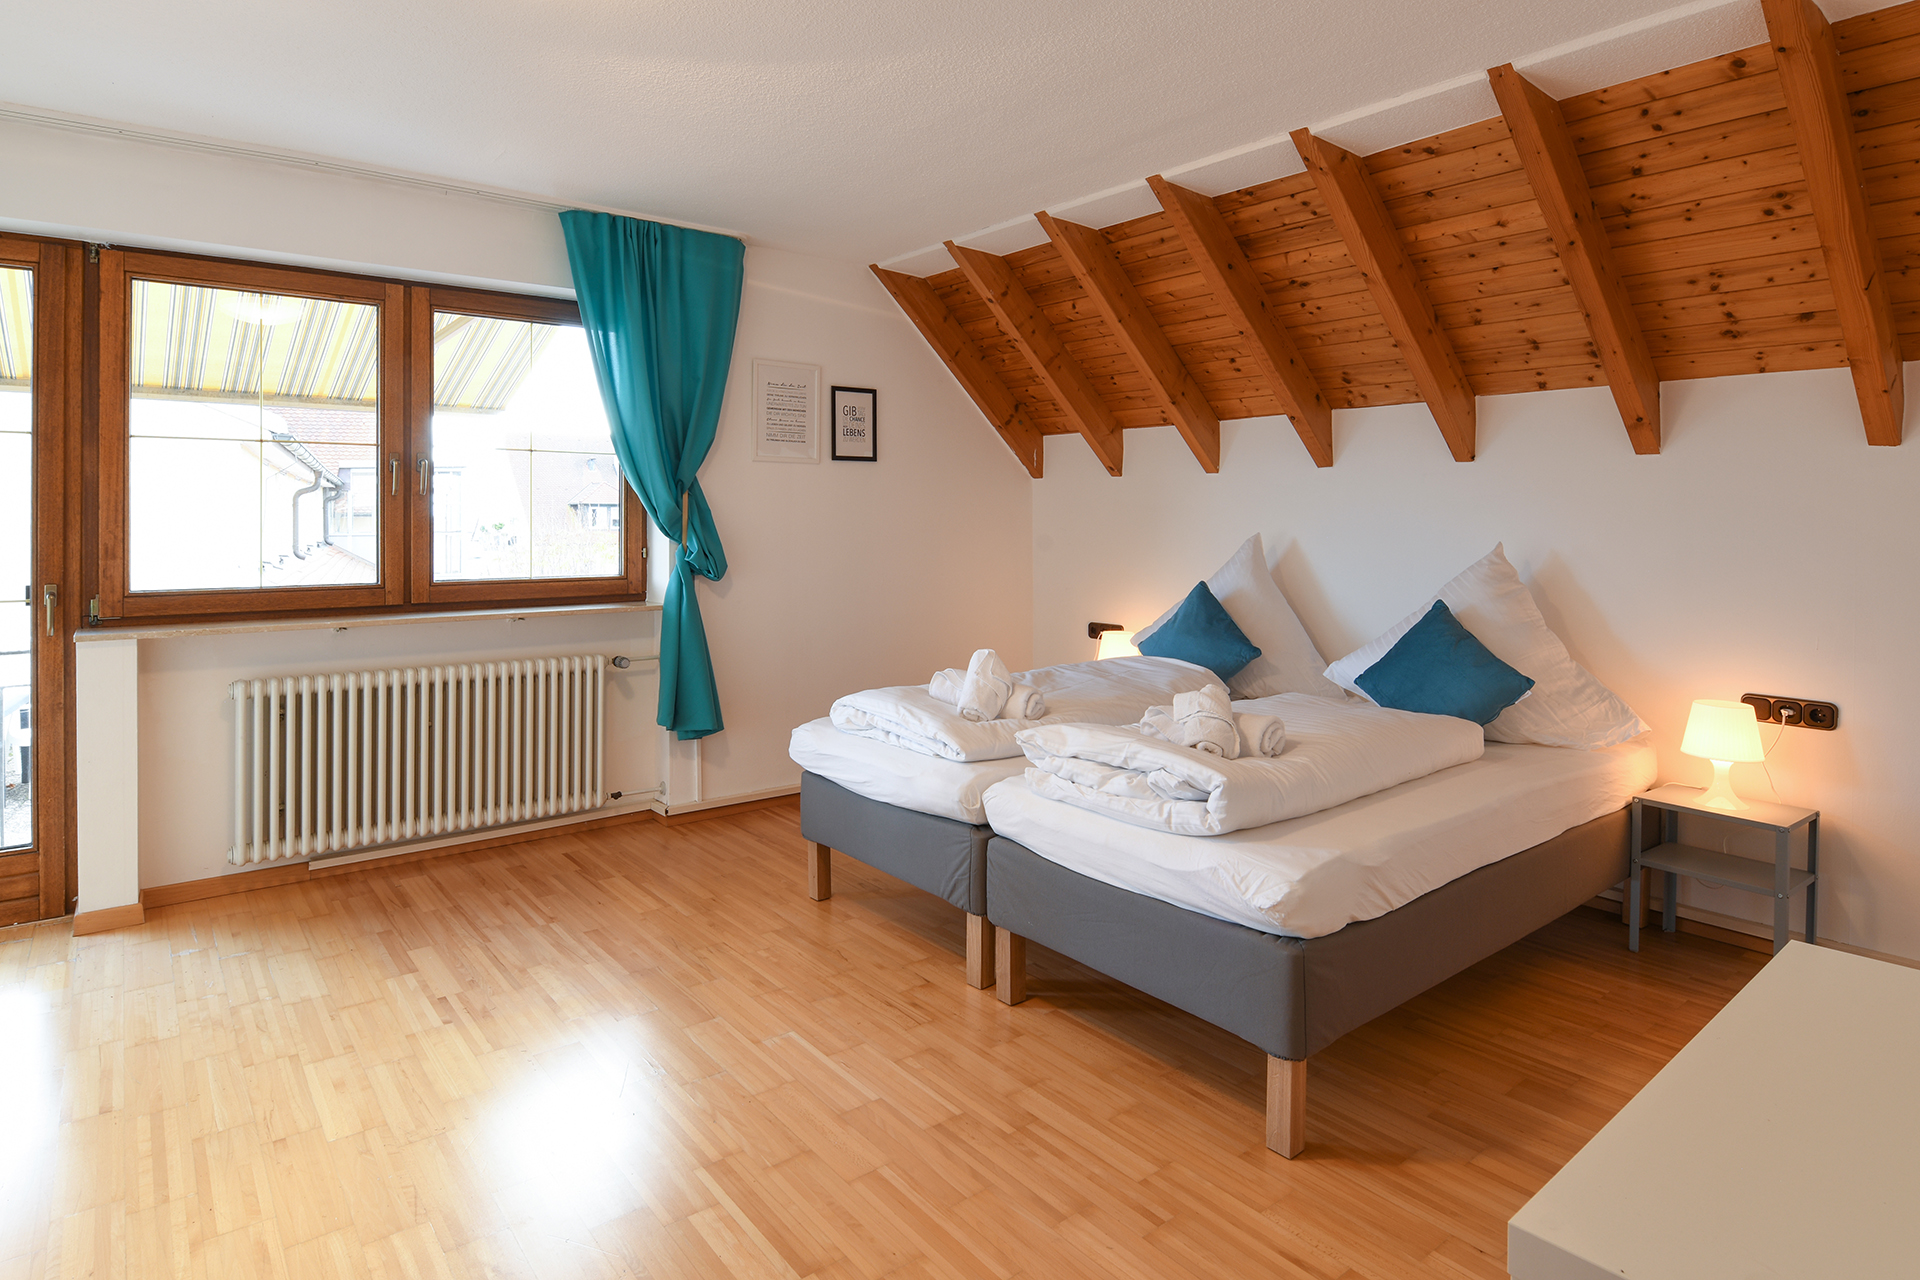 Holiday apartments on Lake Constance: Immenstaad 1 - Bedroom 1